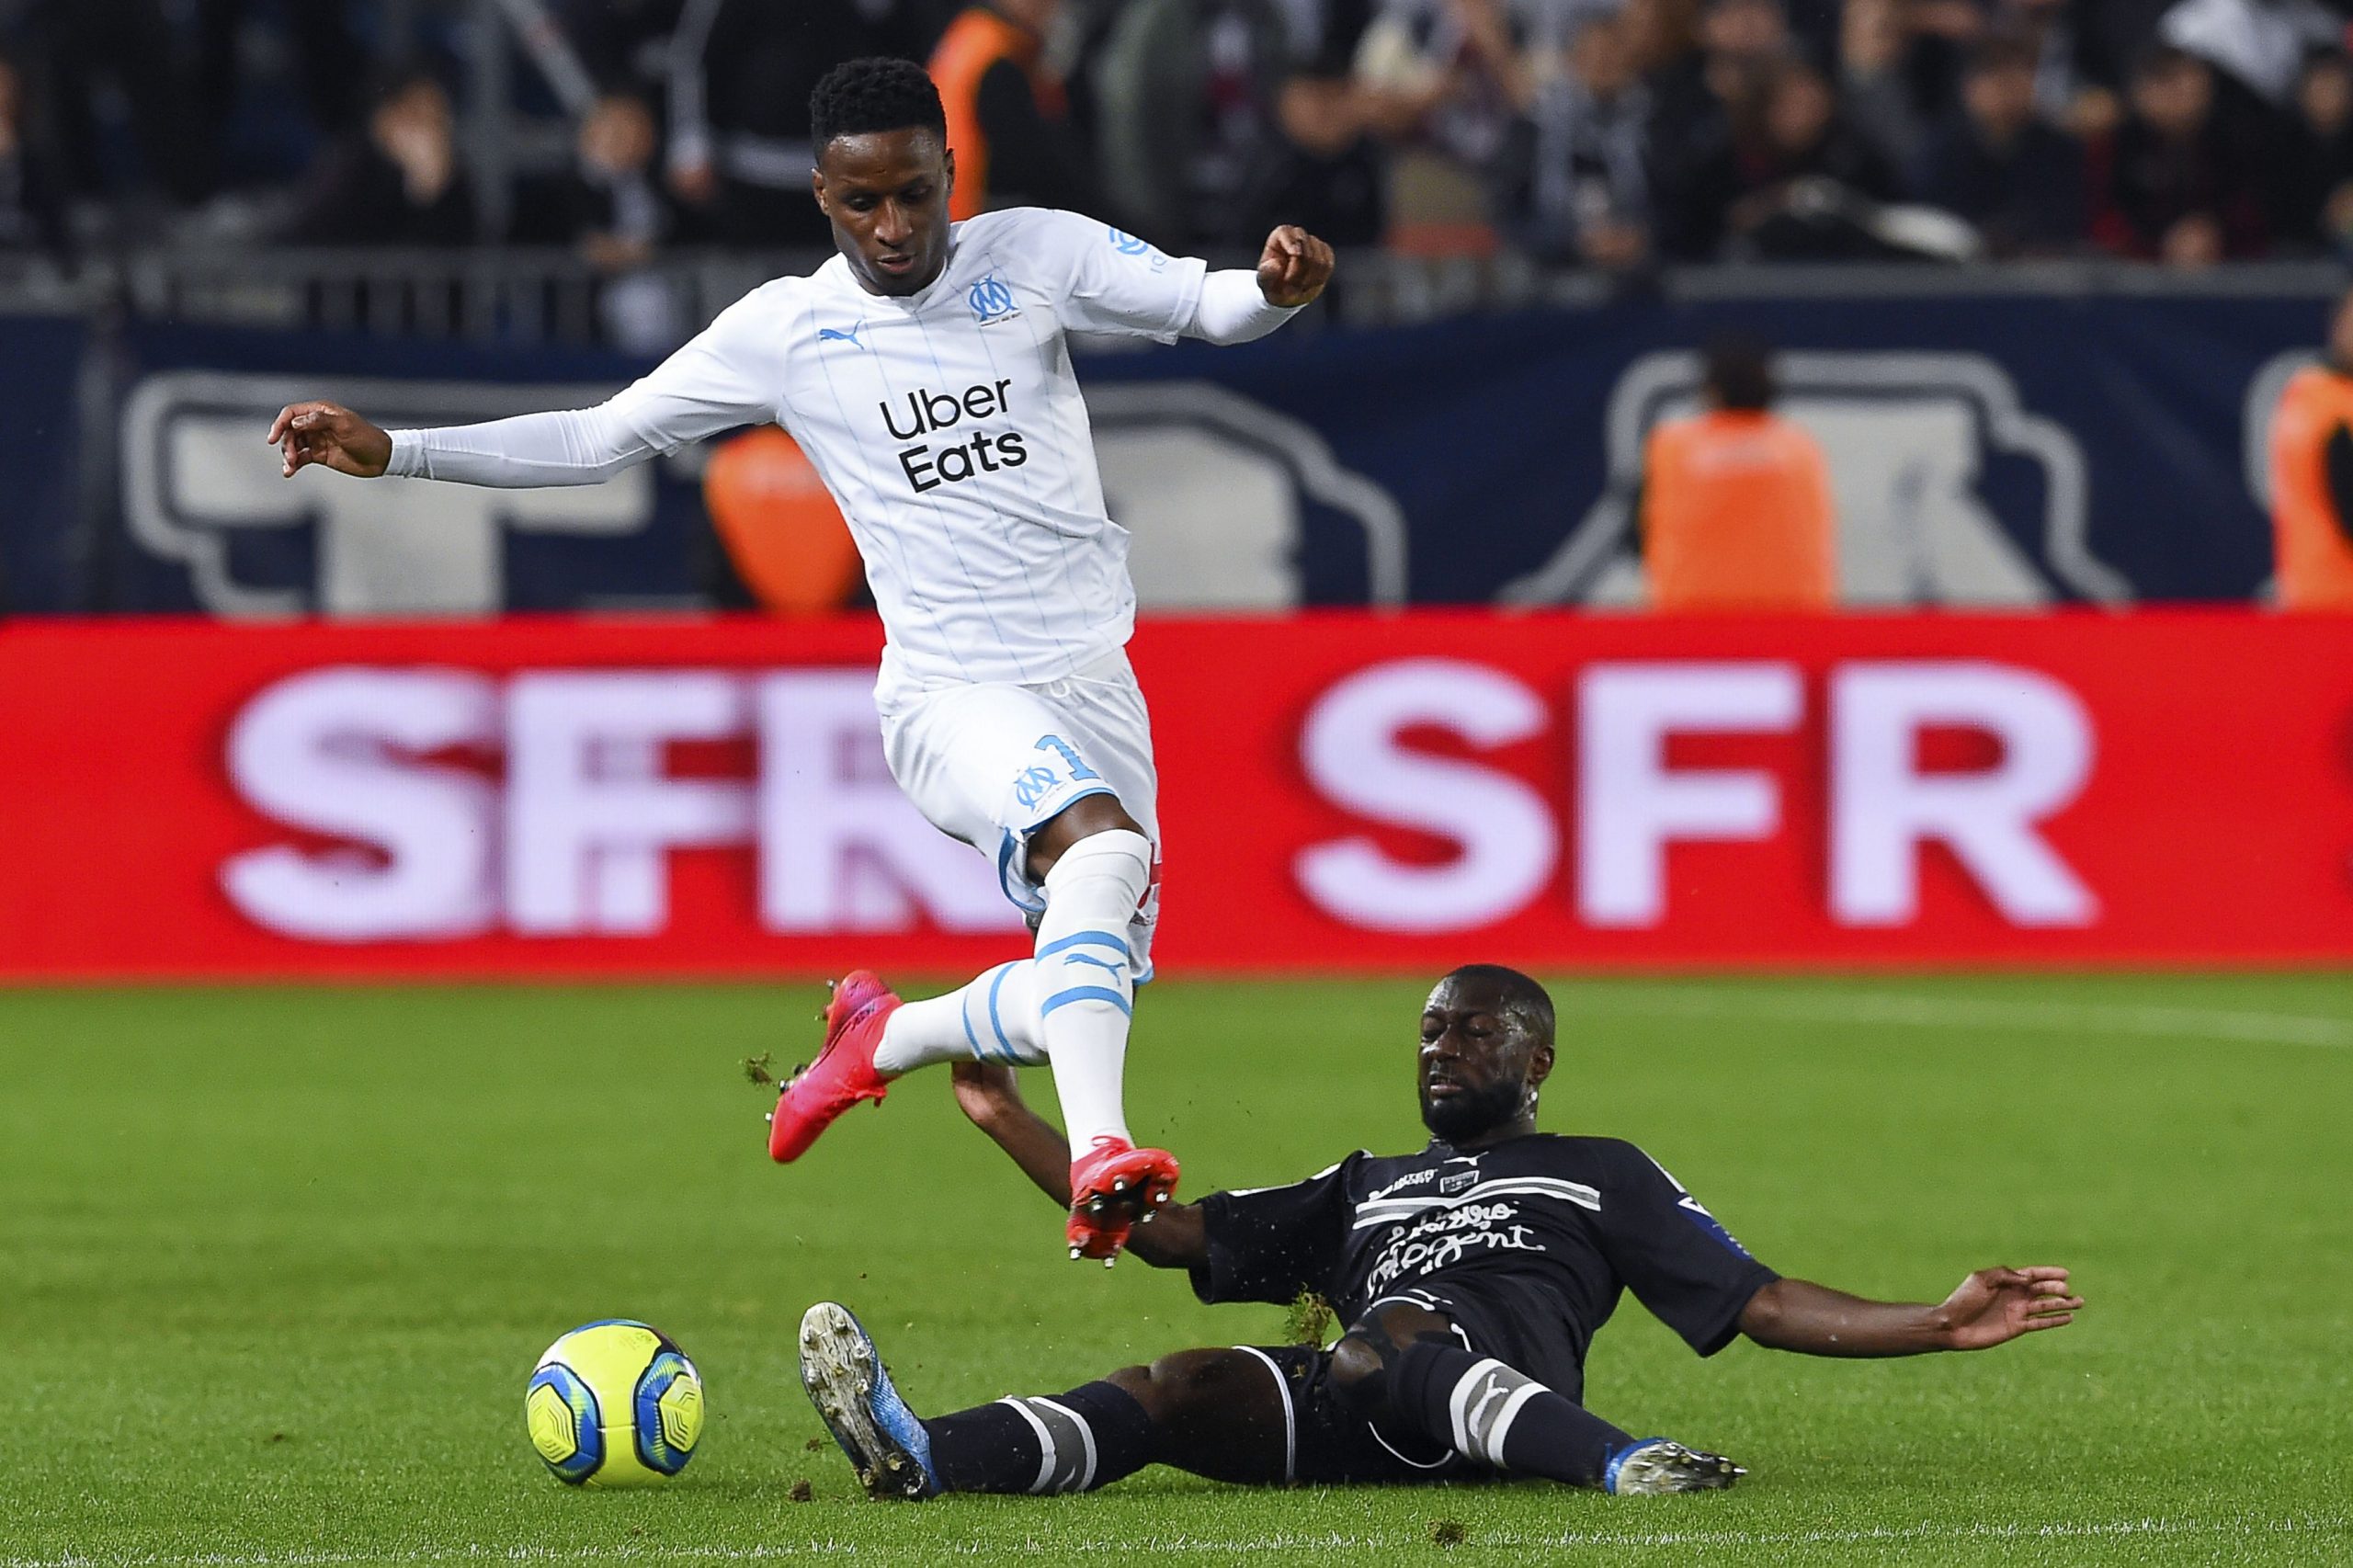 Newcastle United face fierce competition in pursuit of Bouna Sarr who is in action in the photo